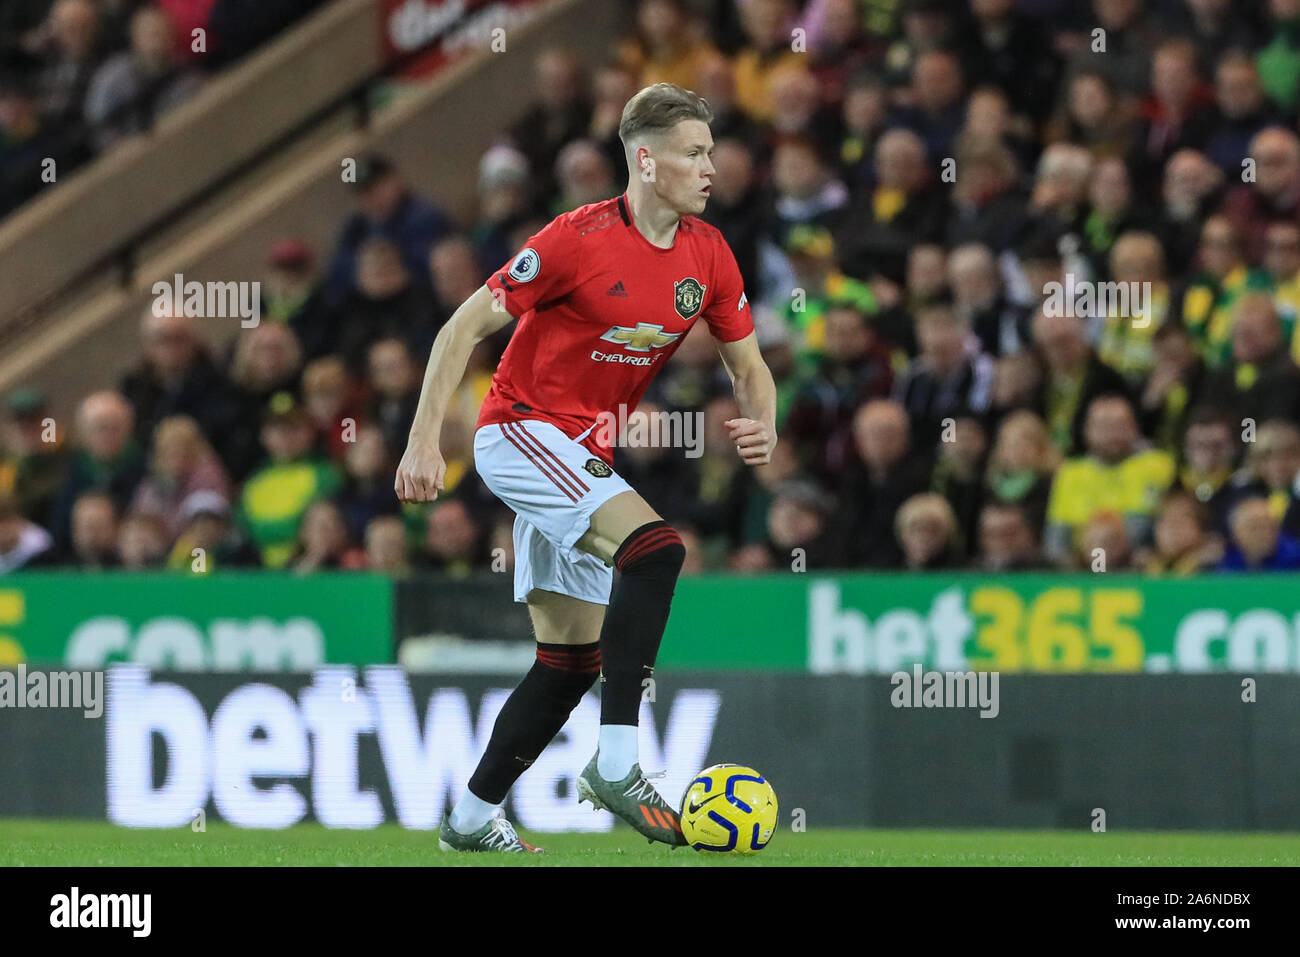 27th October 2019, Carrow Road, Norwich, England; Premier League, Norwich City v Manchester United : Scott McTominay (39) of Manchester United in action during the game  Credit: Mark Cosgrove/News Images Stock Photo